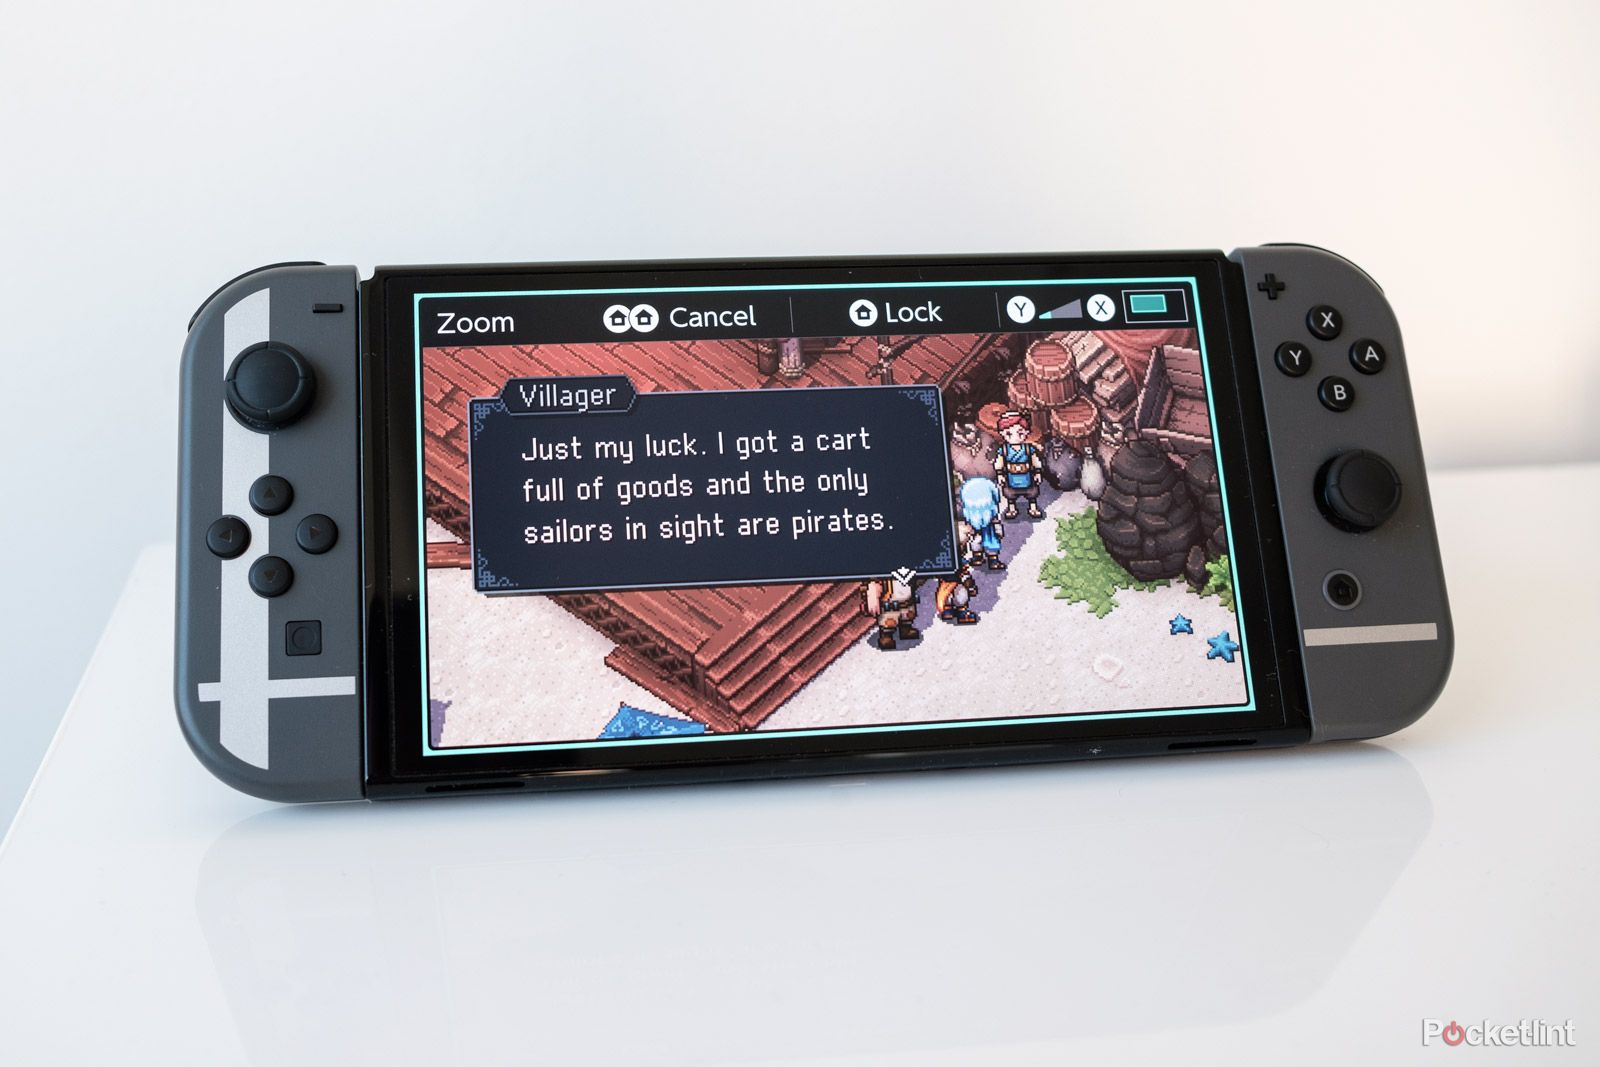 The Nintendo Switch offers a Zoom functionality that can increase the size of text and other interface elements.